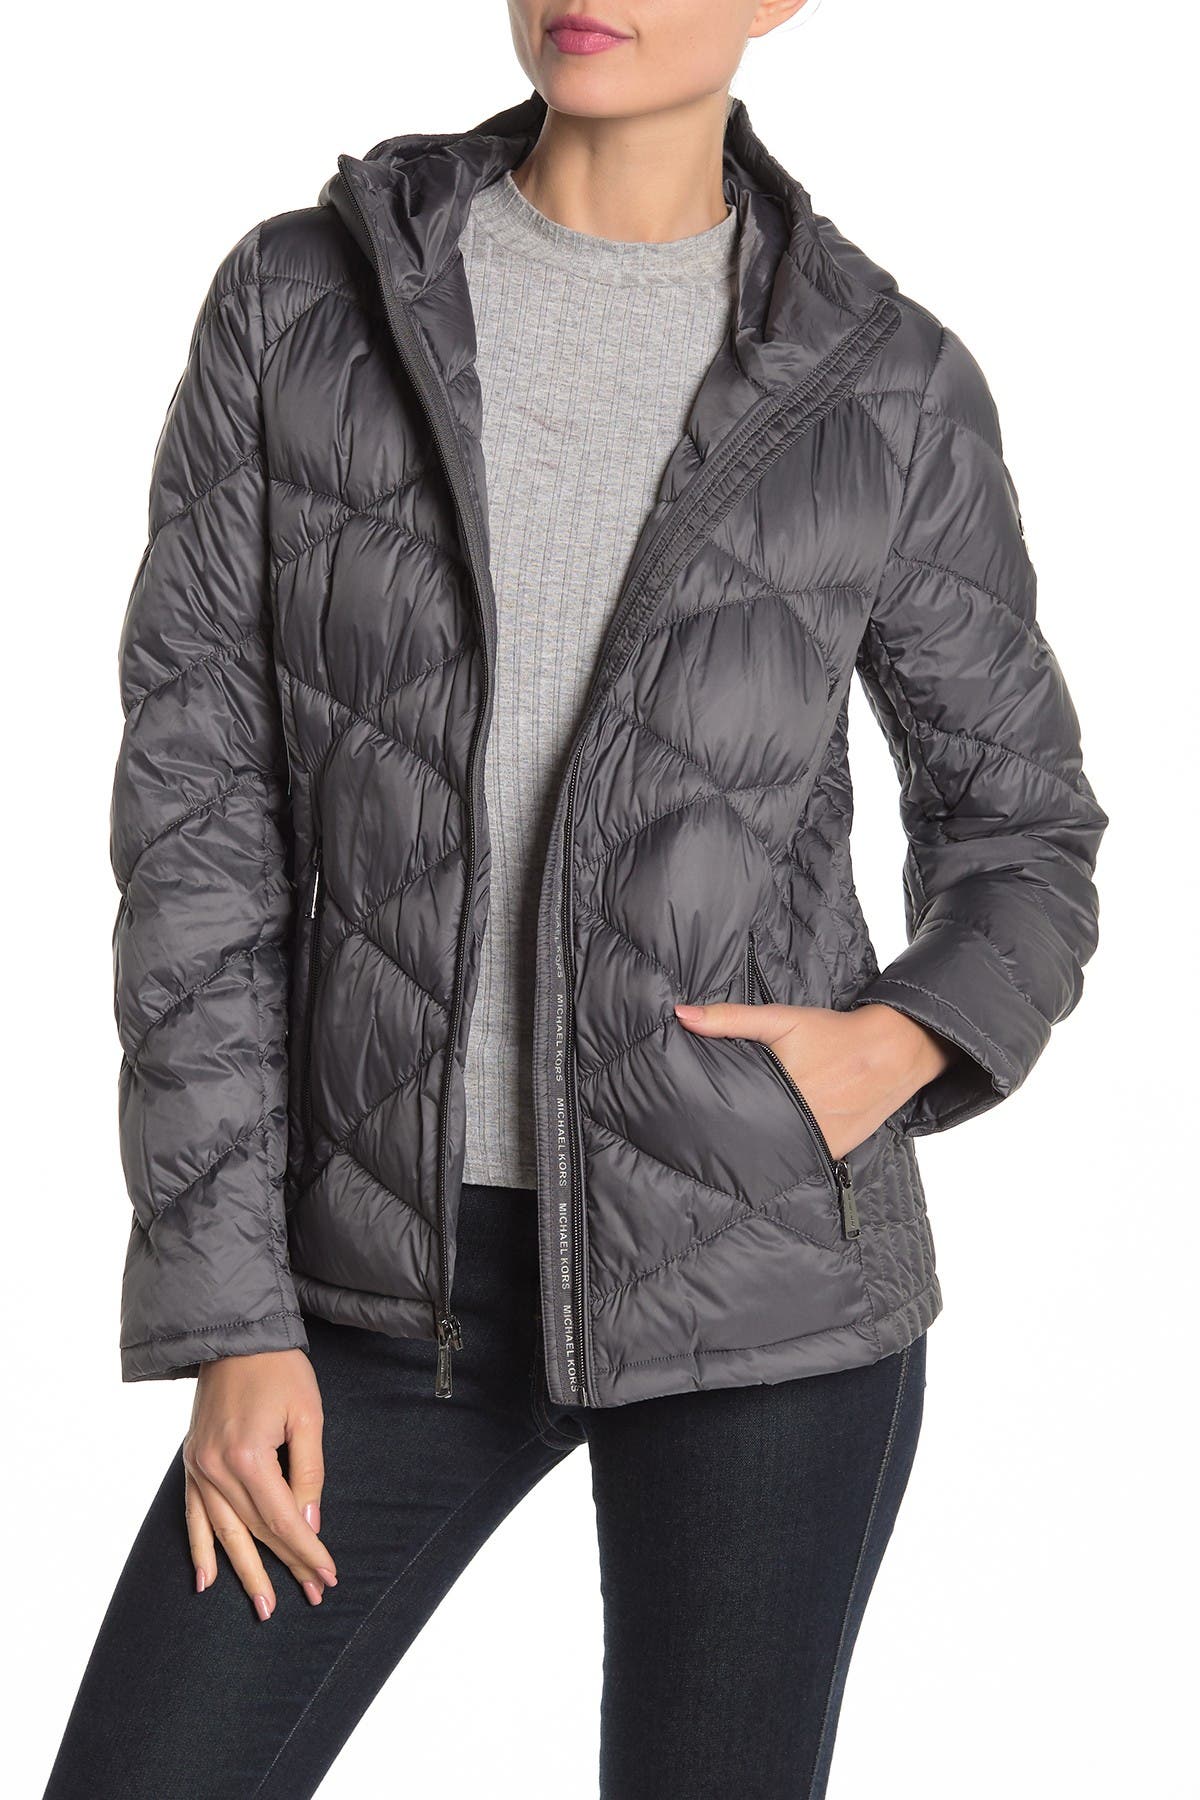 michael kors packable quilted jacket